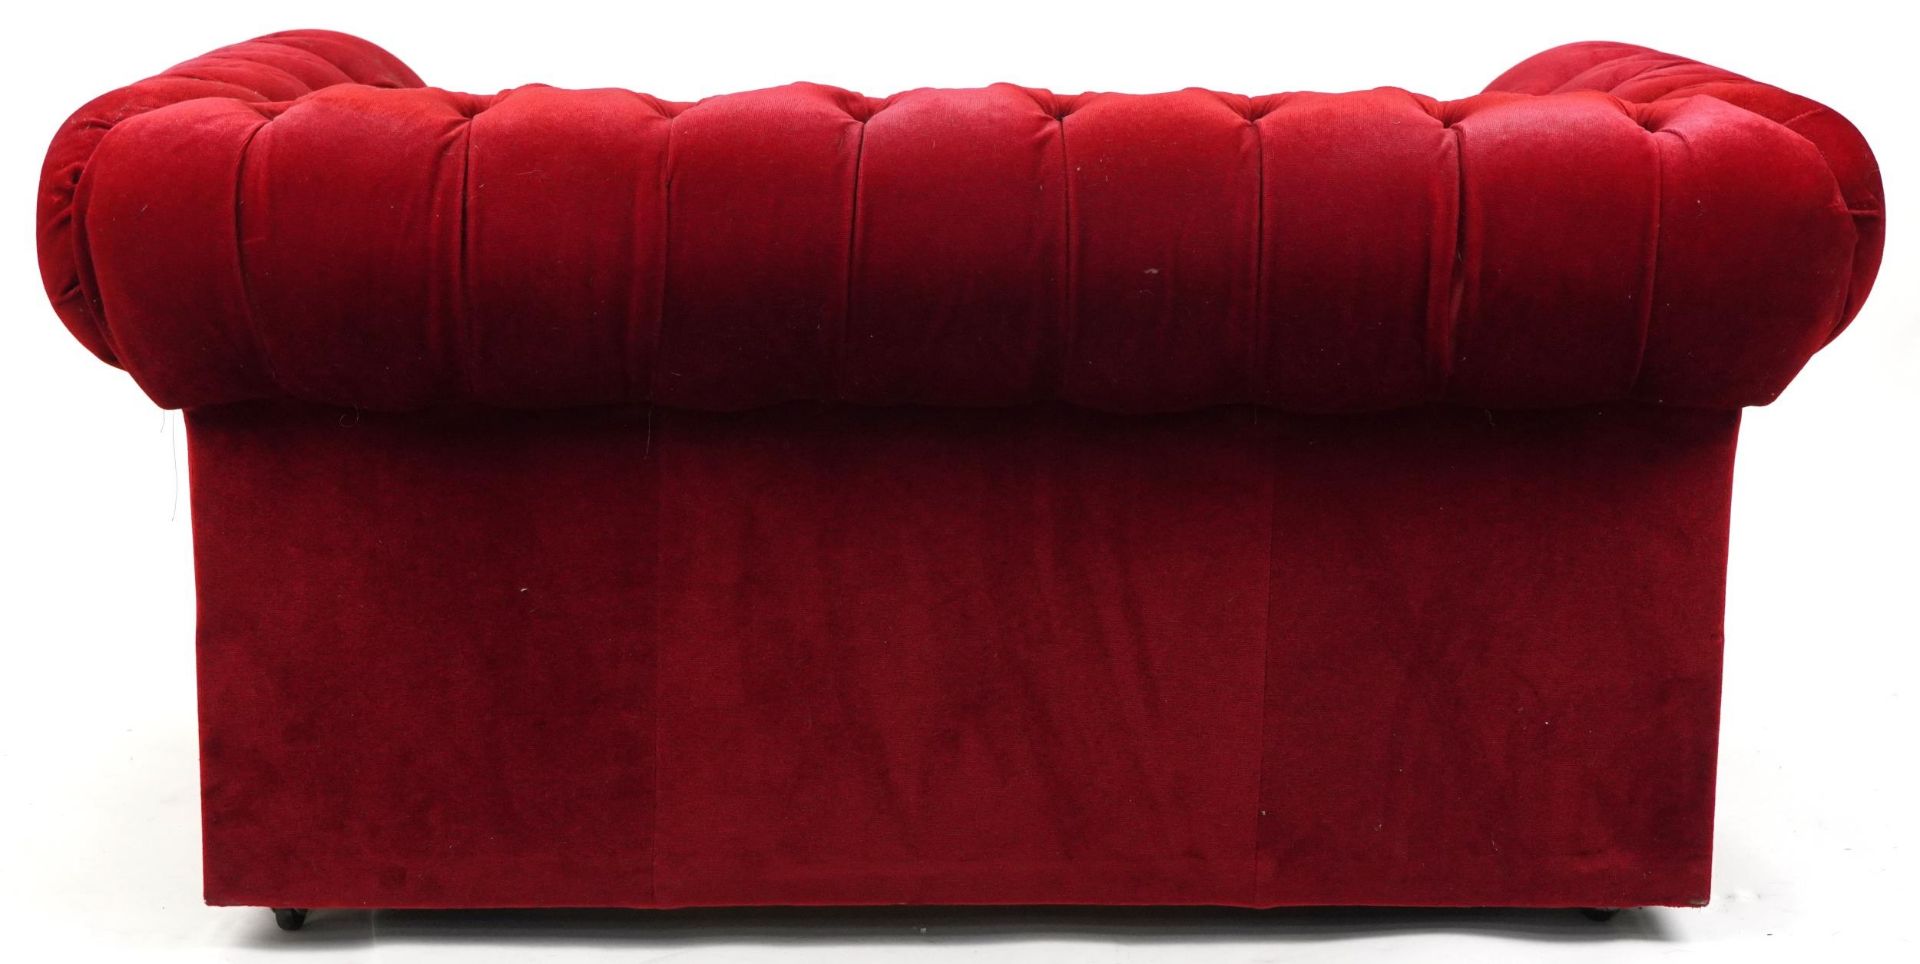 Chesterfield two seater settee/sofa bed with red button back upholstery, 73cm H x 152cm W x 88cm D - Bild 4 aus 4